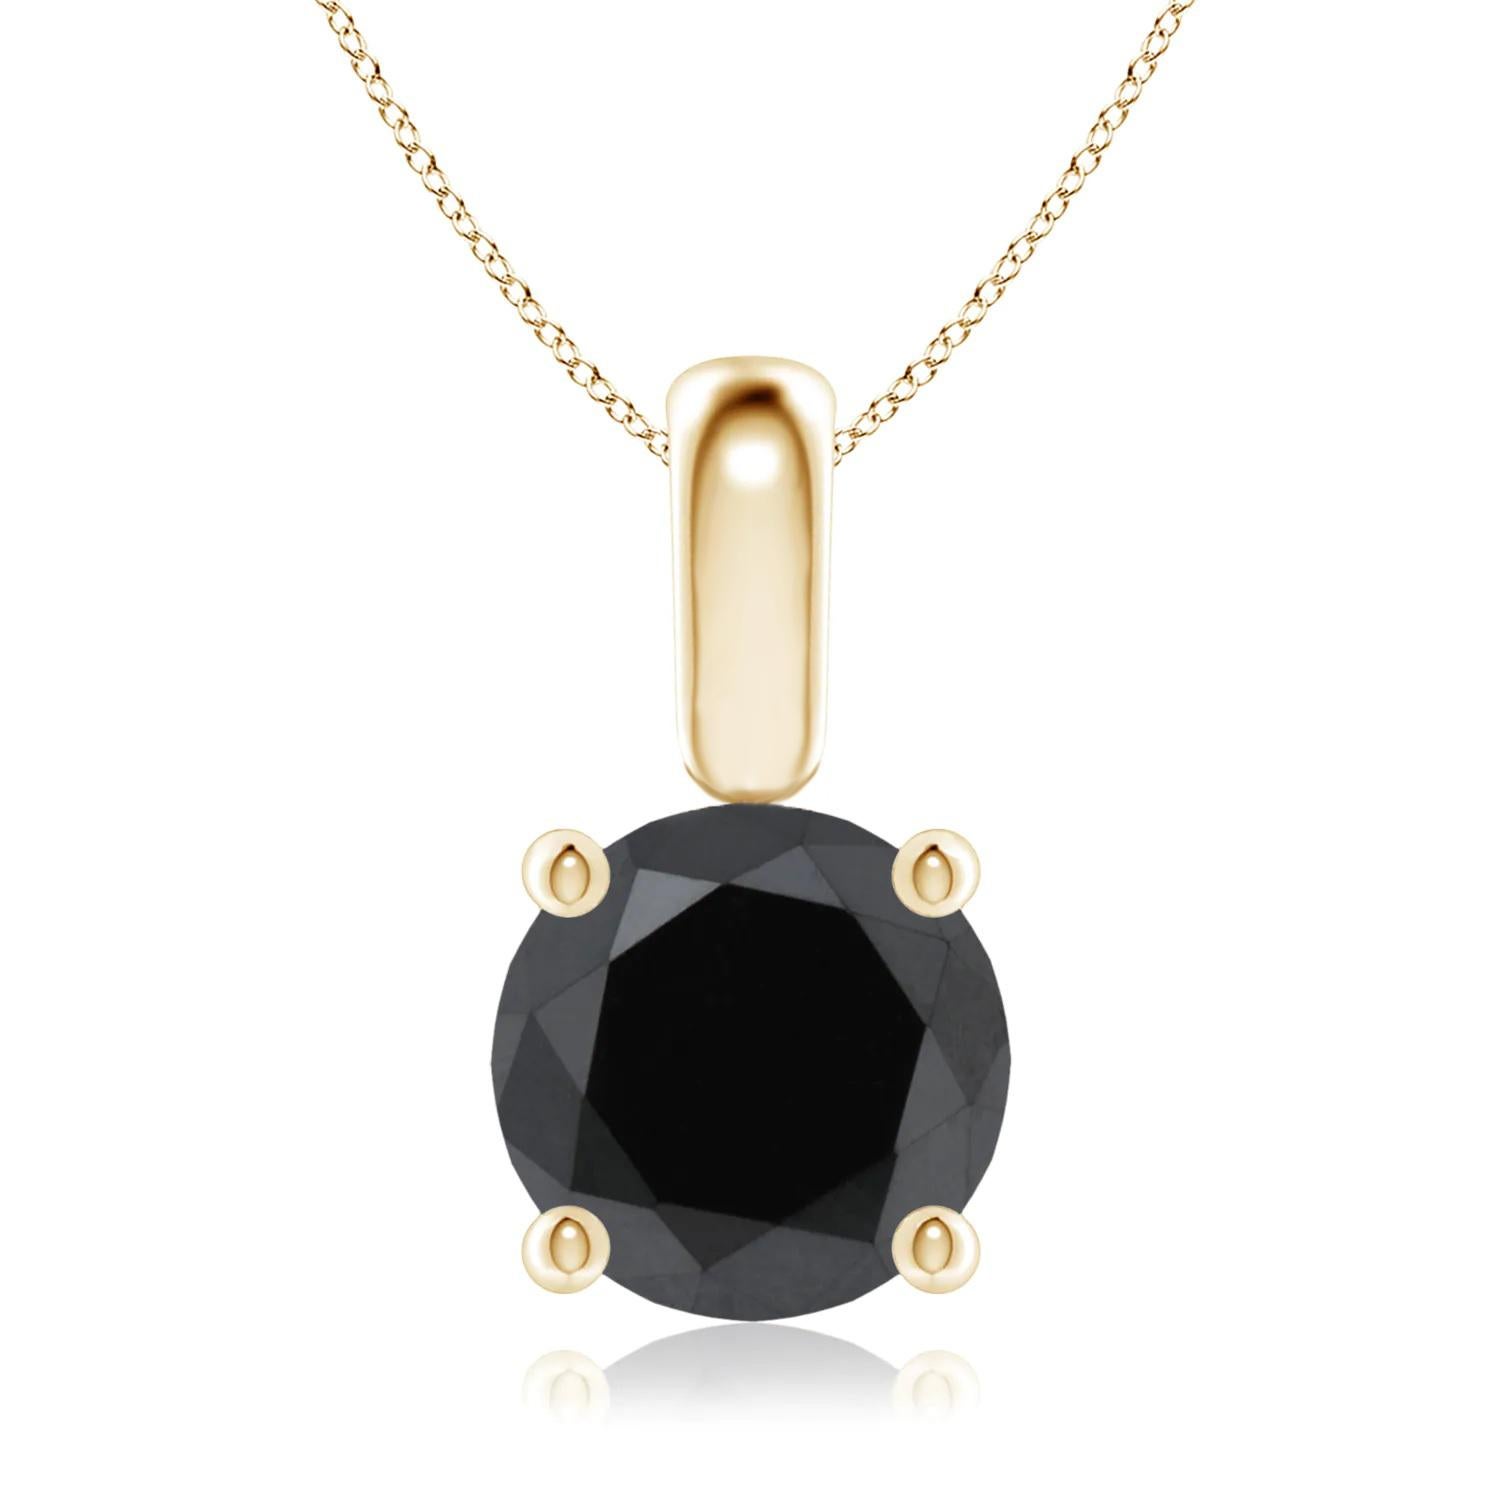 Contemporary 1.55 Carat Round Black Diamond Solitaire Pendant Necklace in 14K Yellow Gold